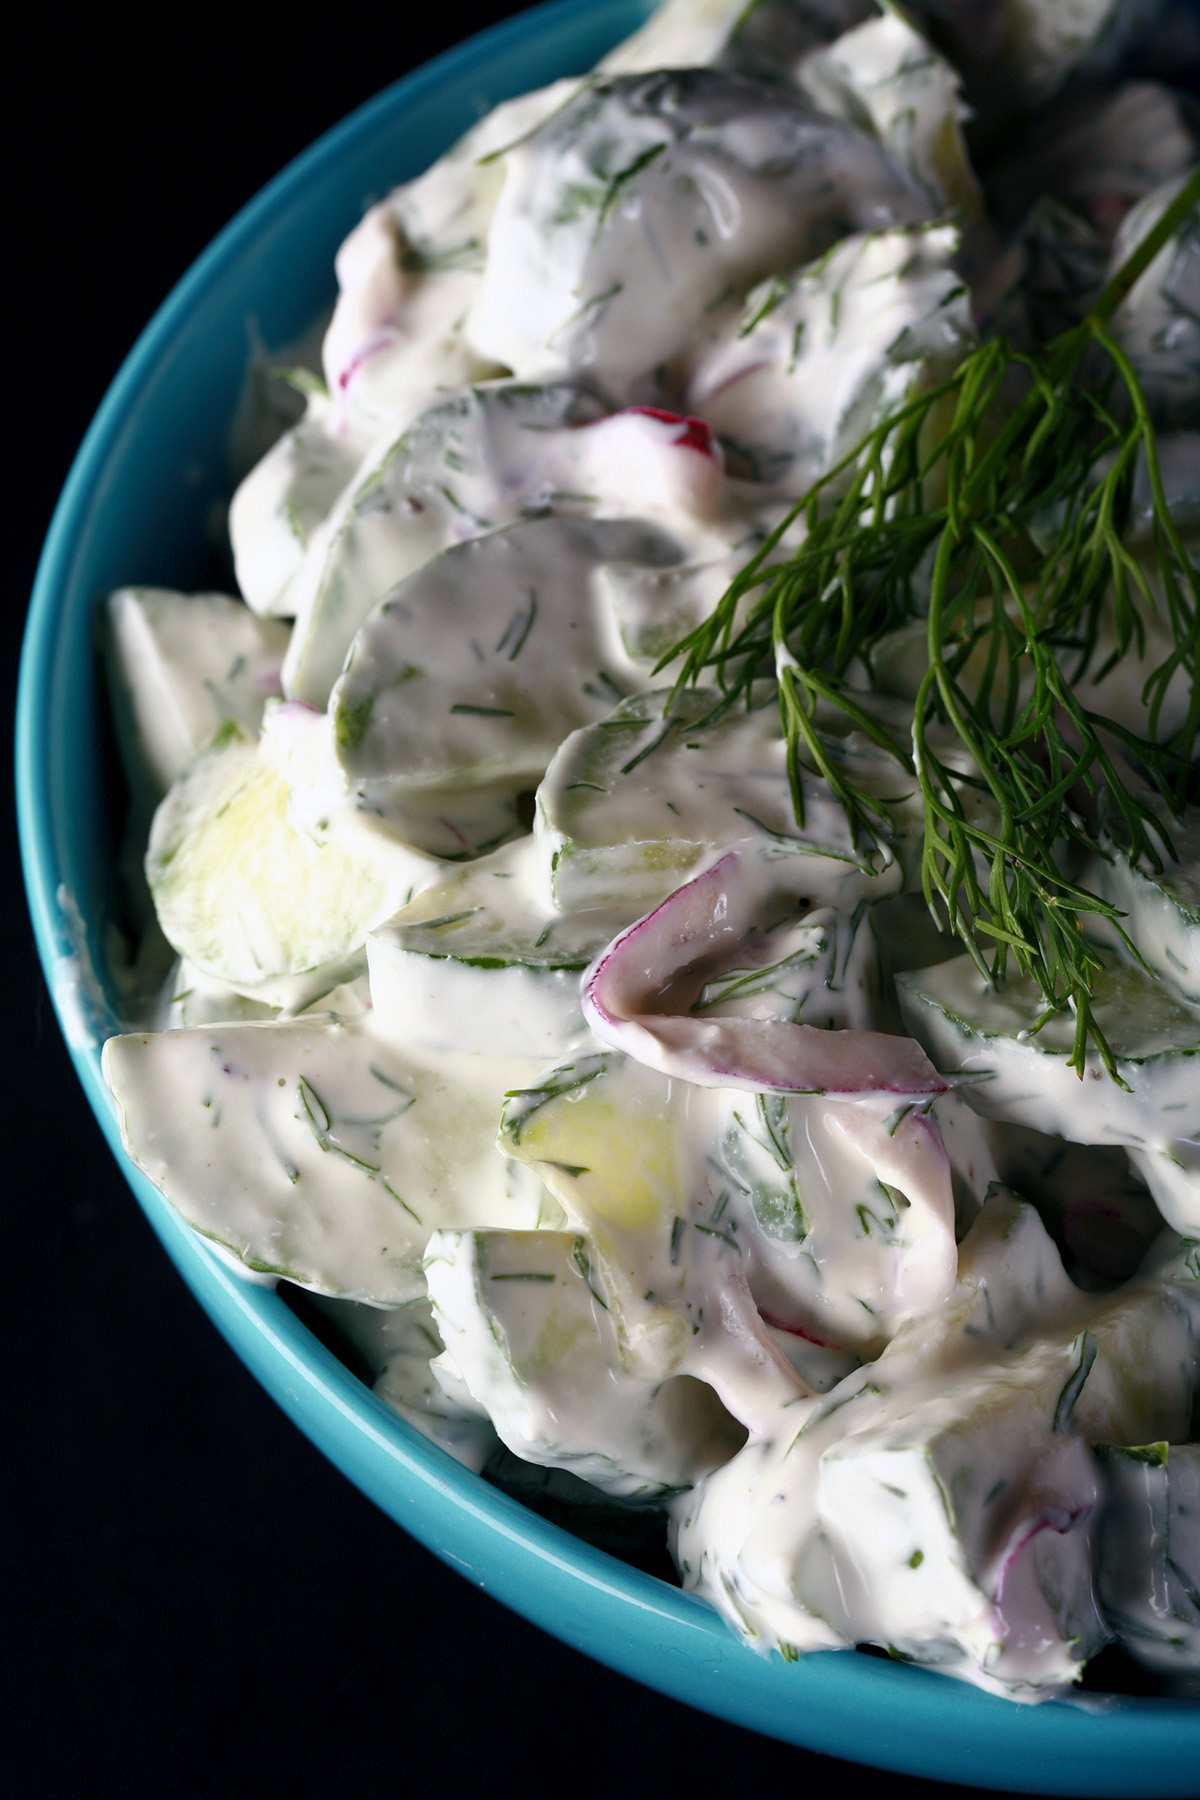 A blue bowl of low carb creamy cumber salad, garnished with a sprig of fresh dill.